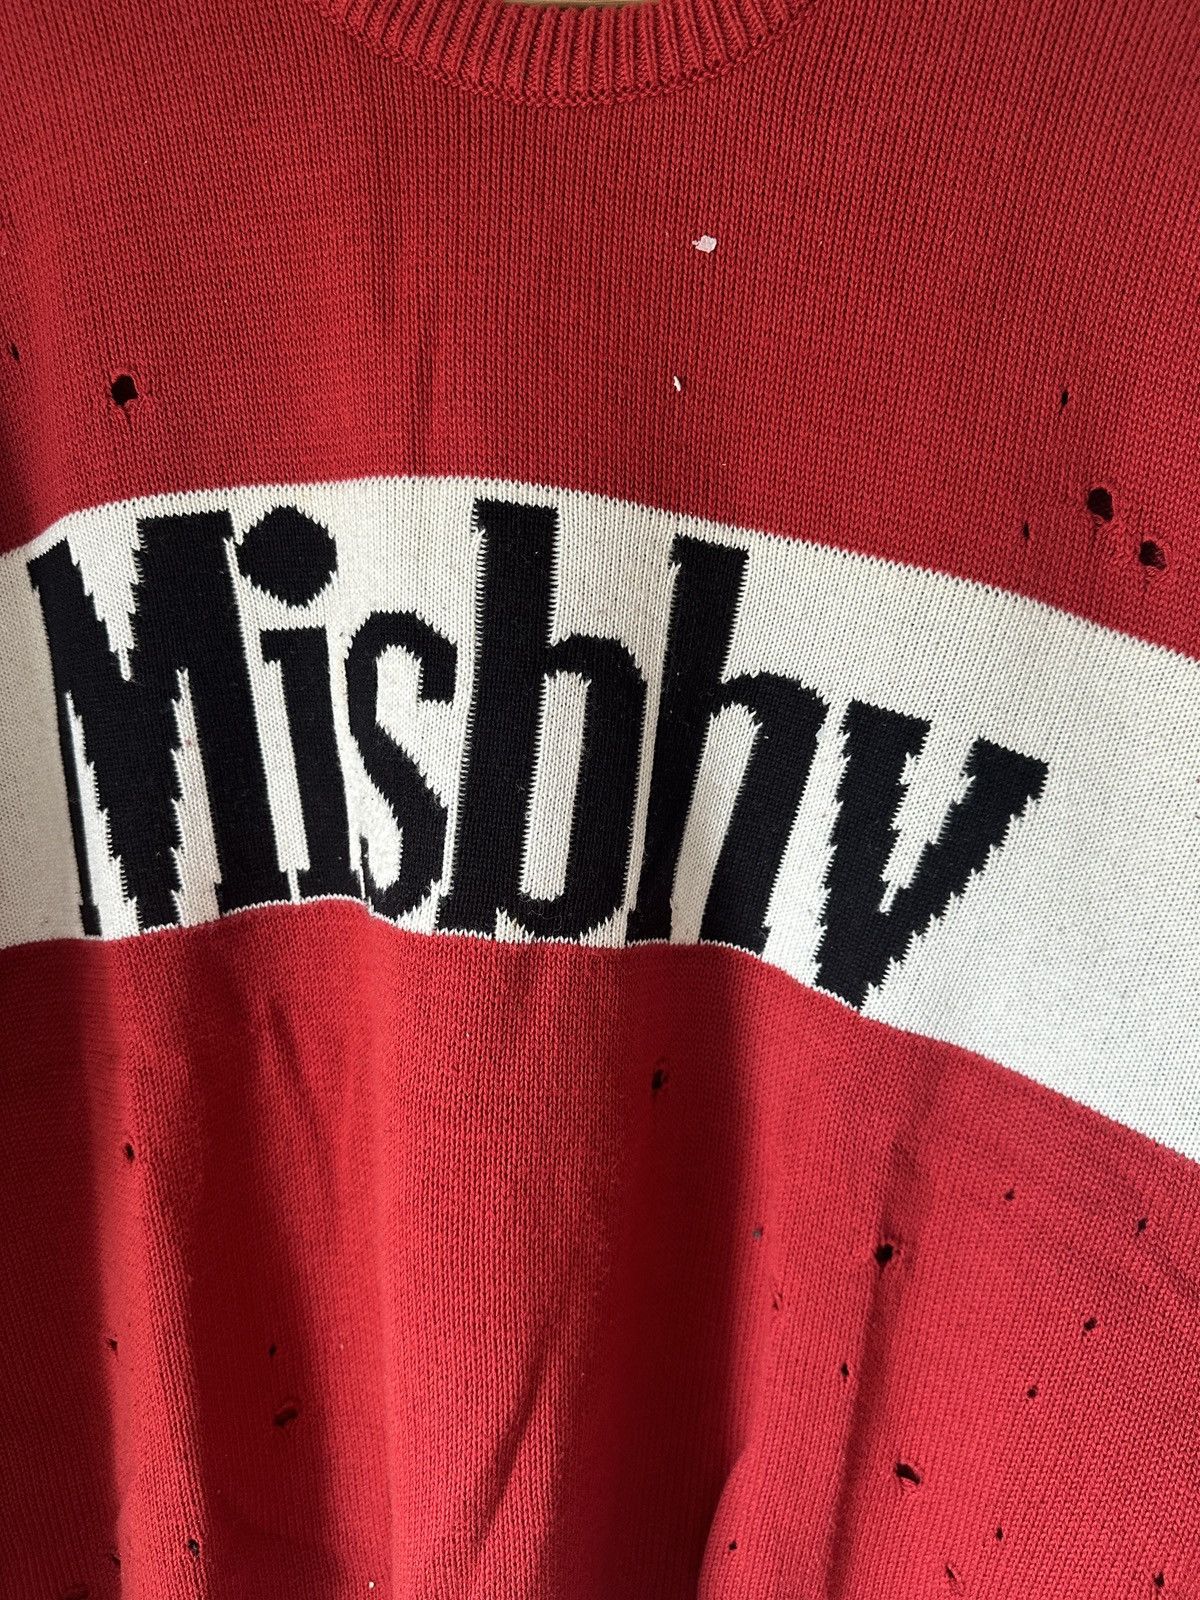 MISBHV Distressed Knitted Red Sweater - 3